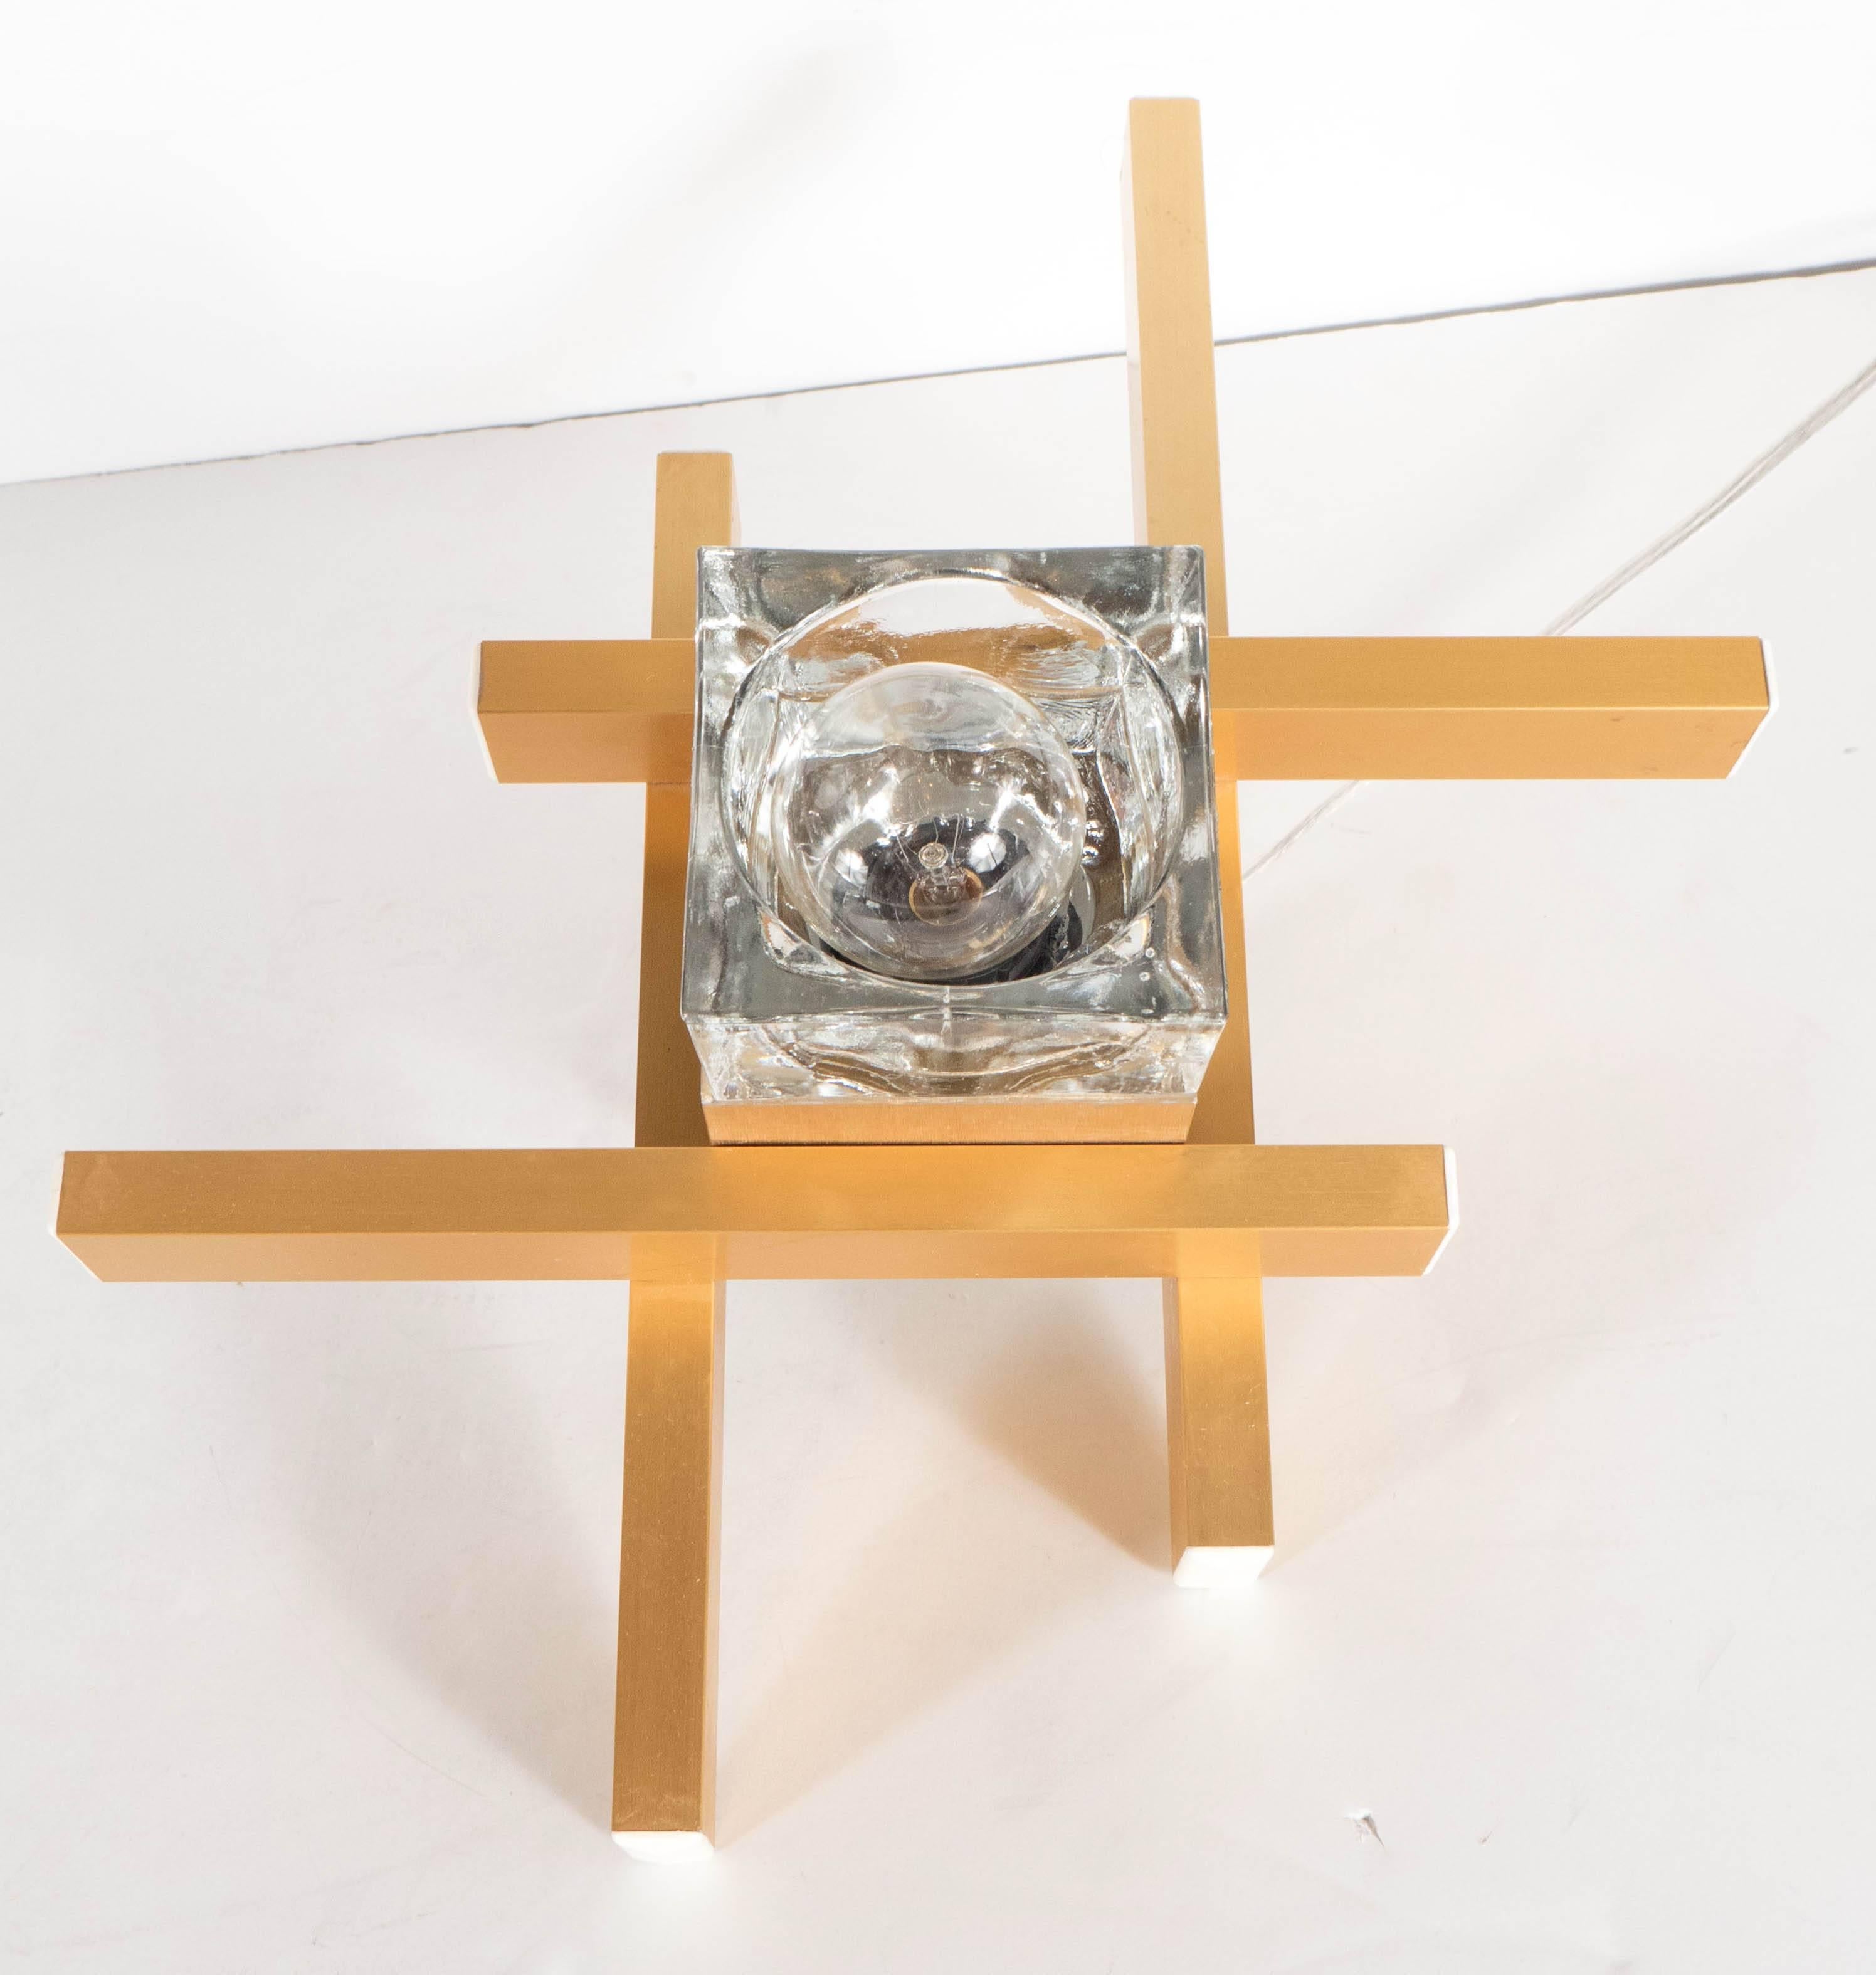 Late 20th Century Mid-Century Modernist Flush Mount Brass and Cubed Glass Fixture by Sciolari For Sale